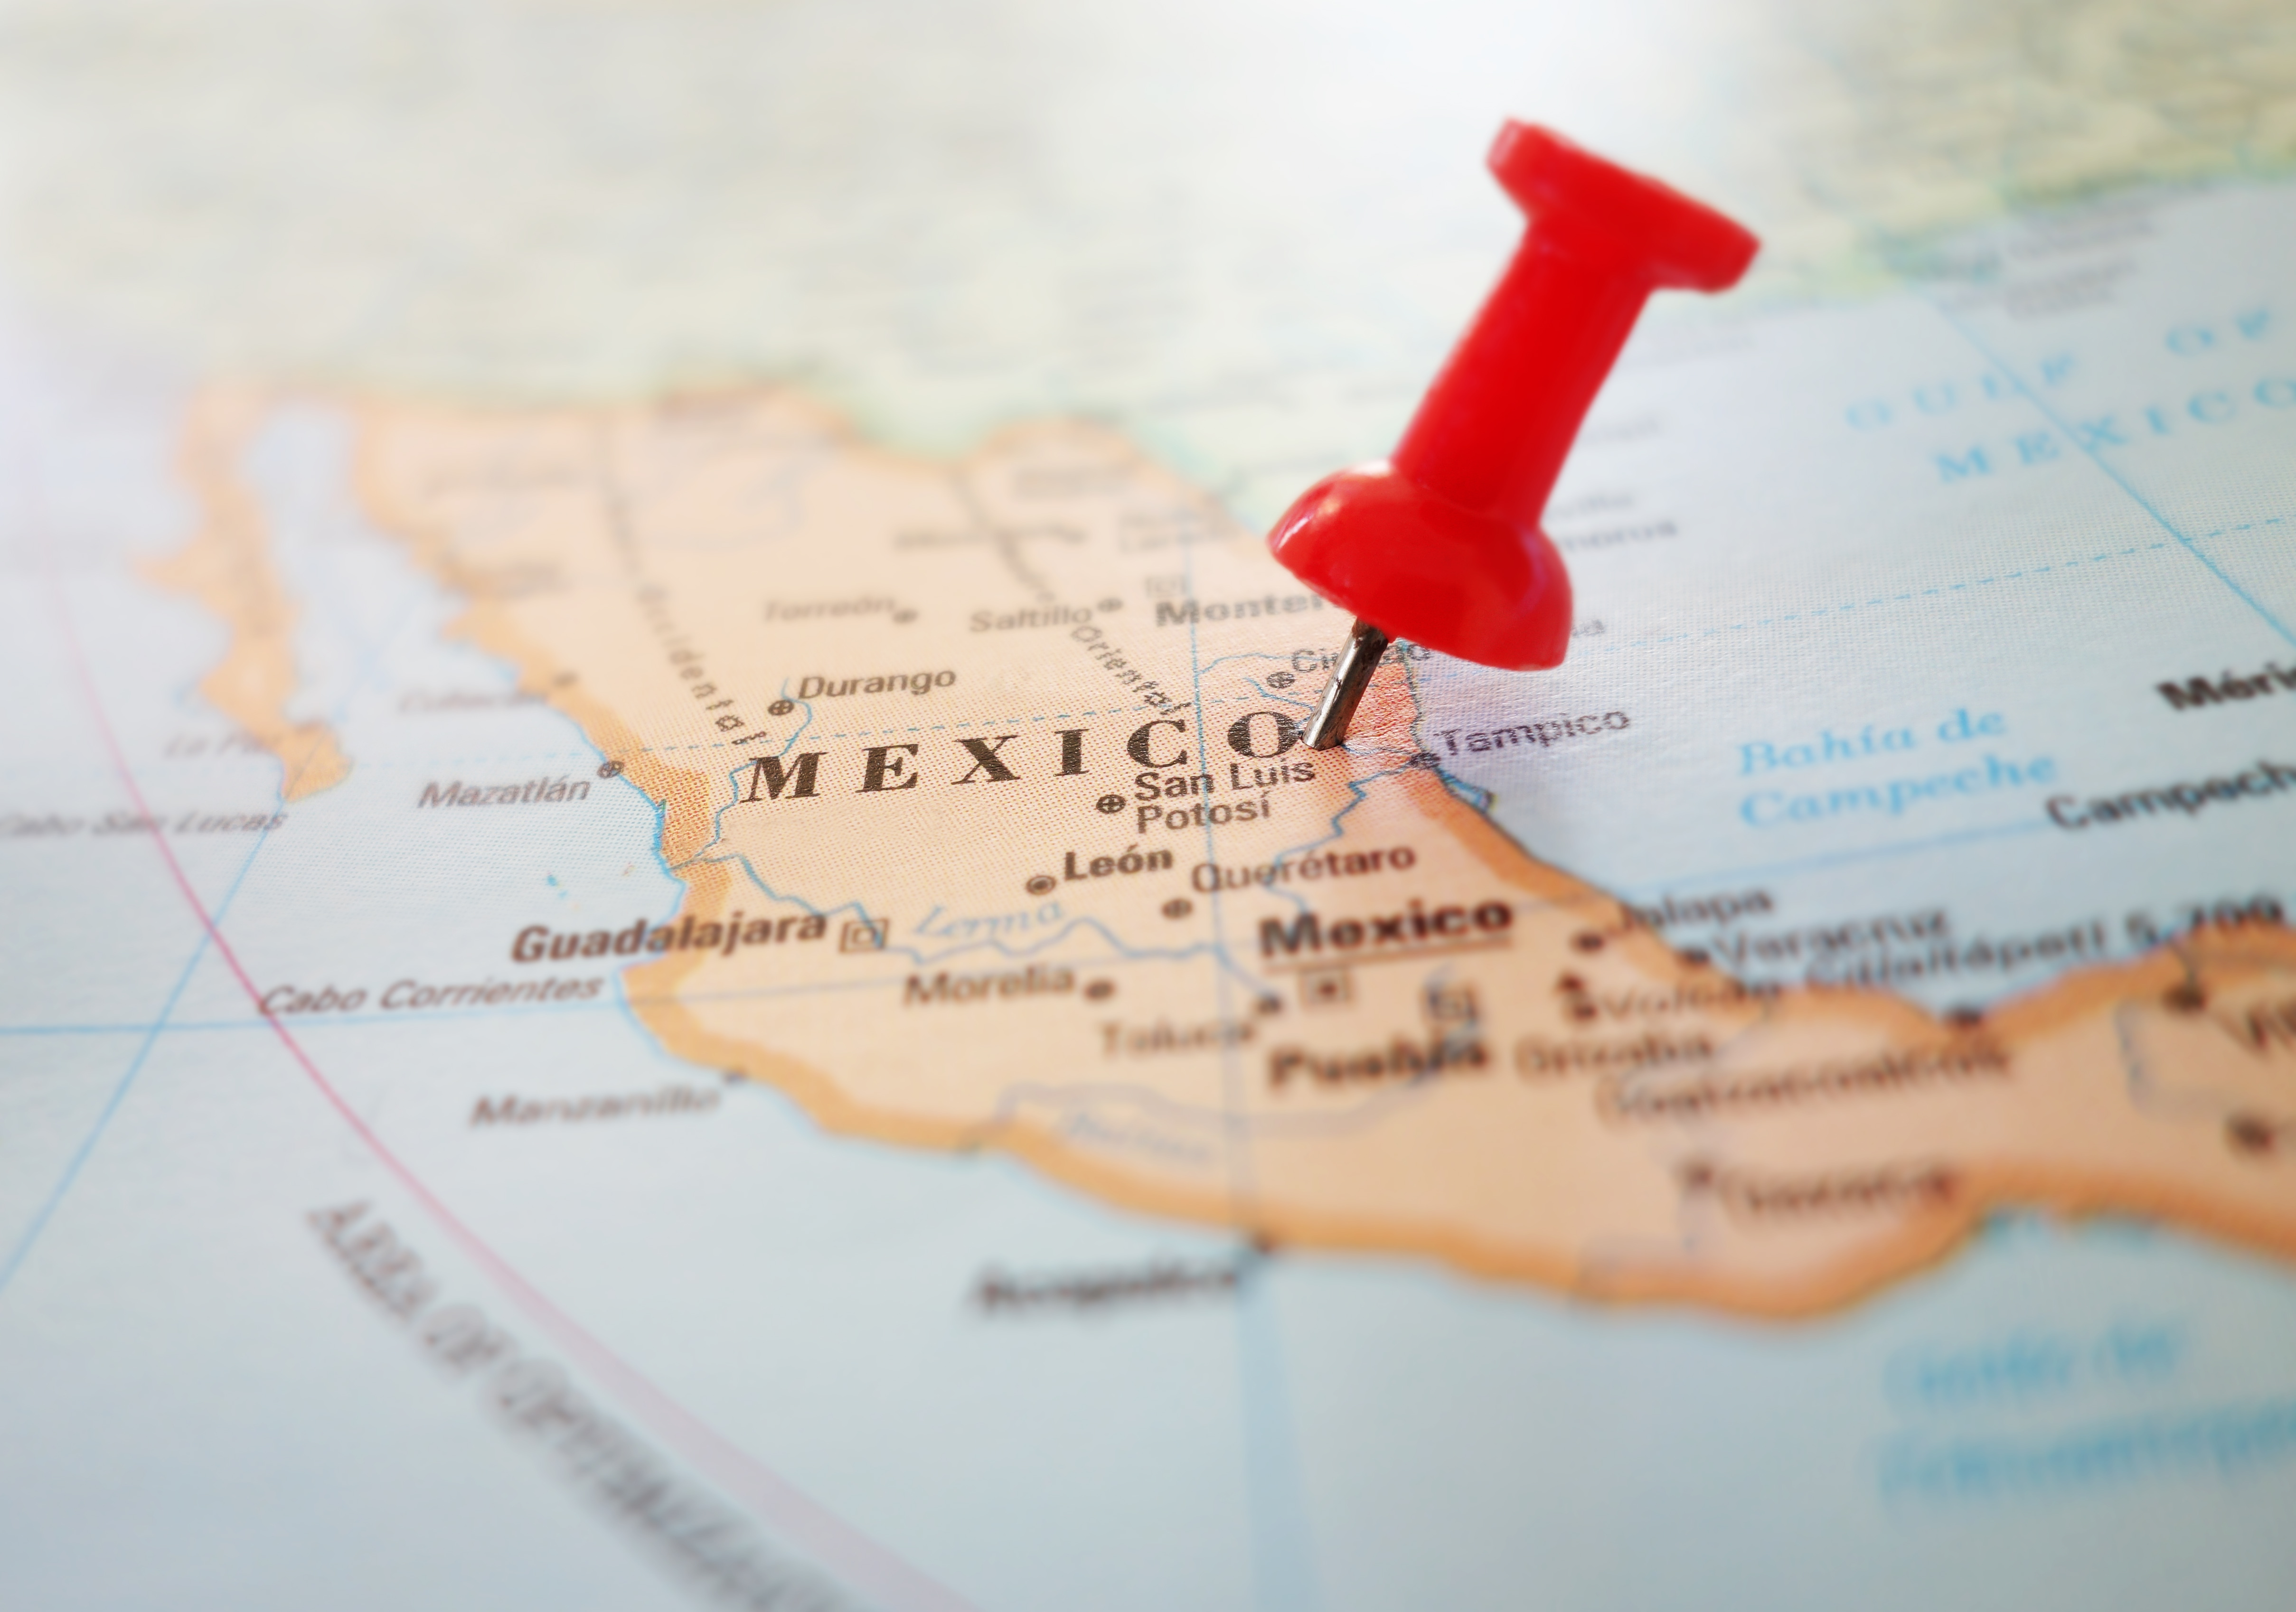 Manufacturers Rebuilding Supply Chains See Opportunity in Mexico